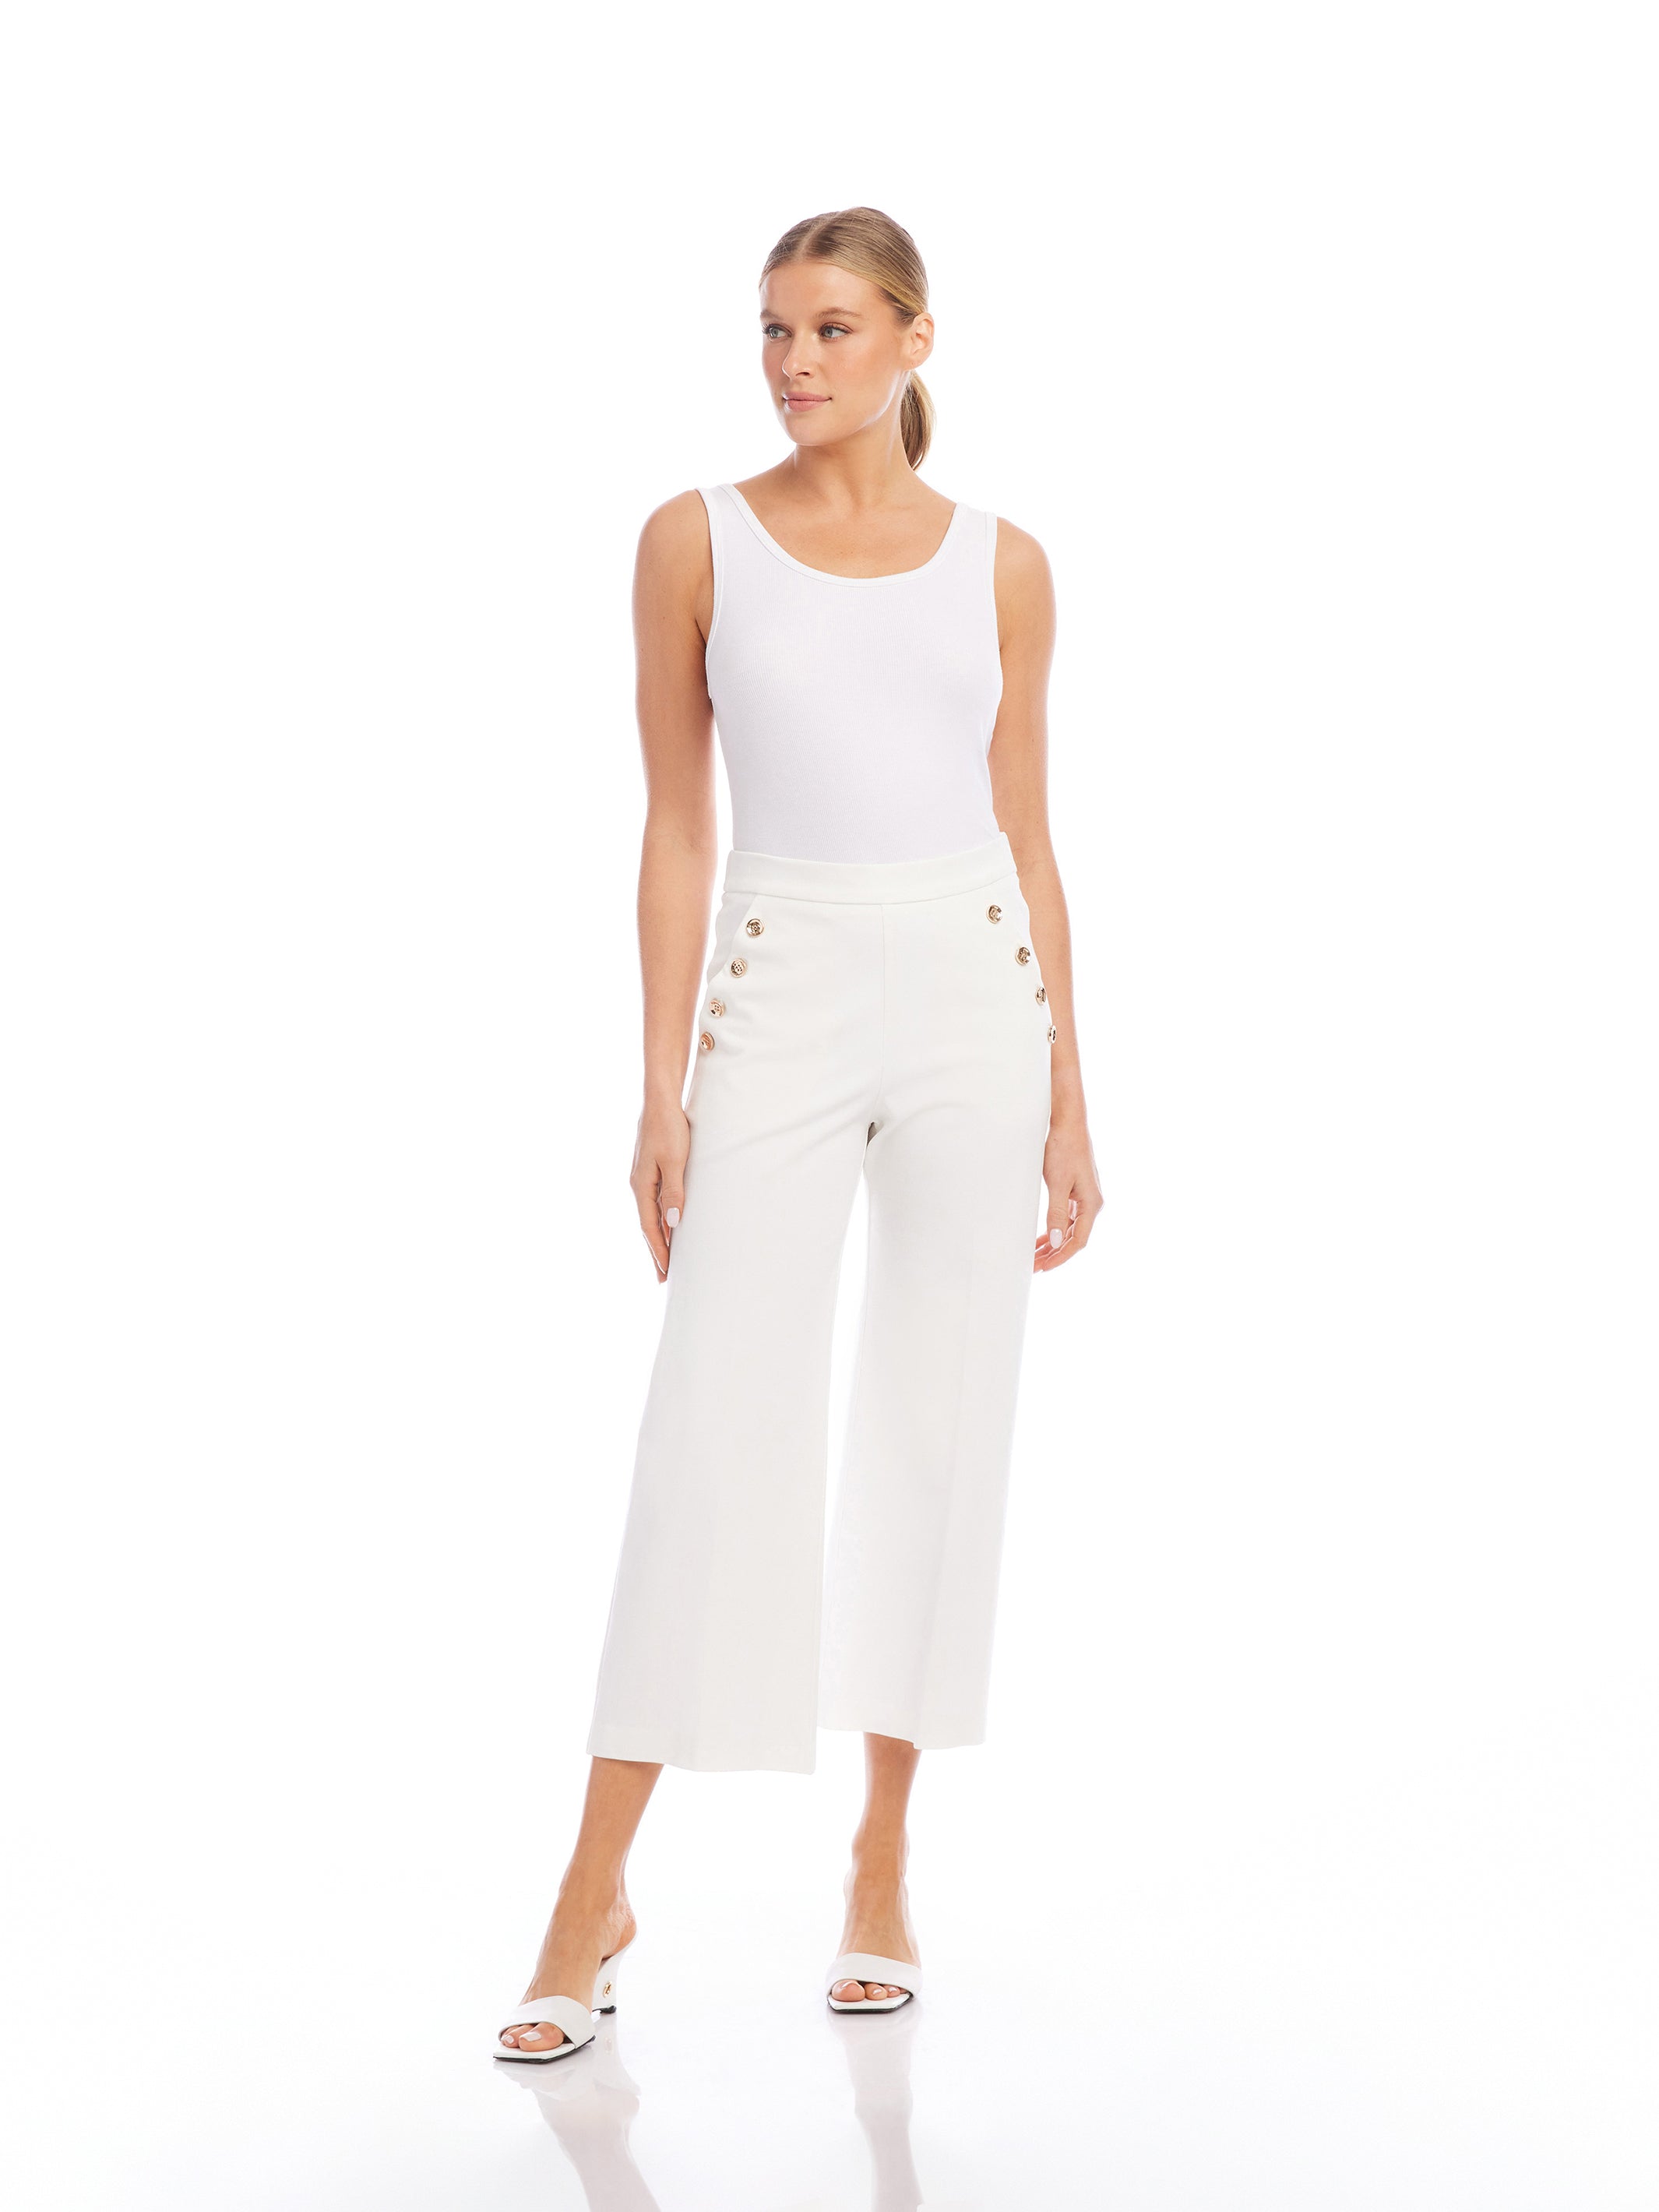 Neptune Cropped Pants